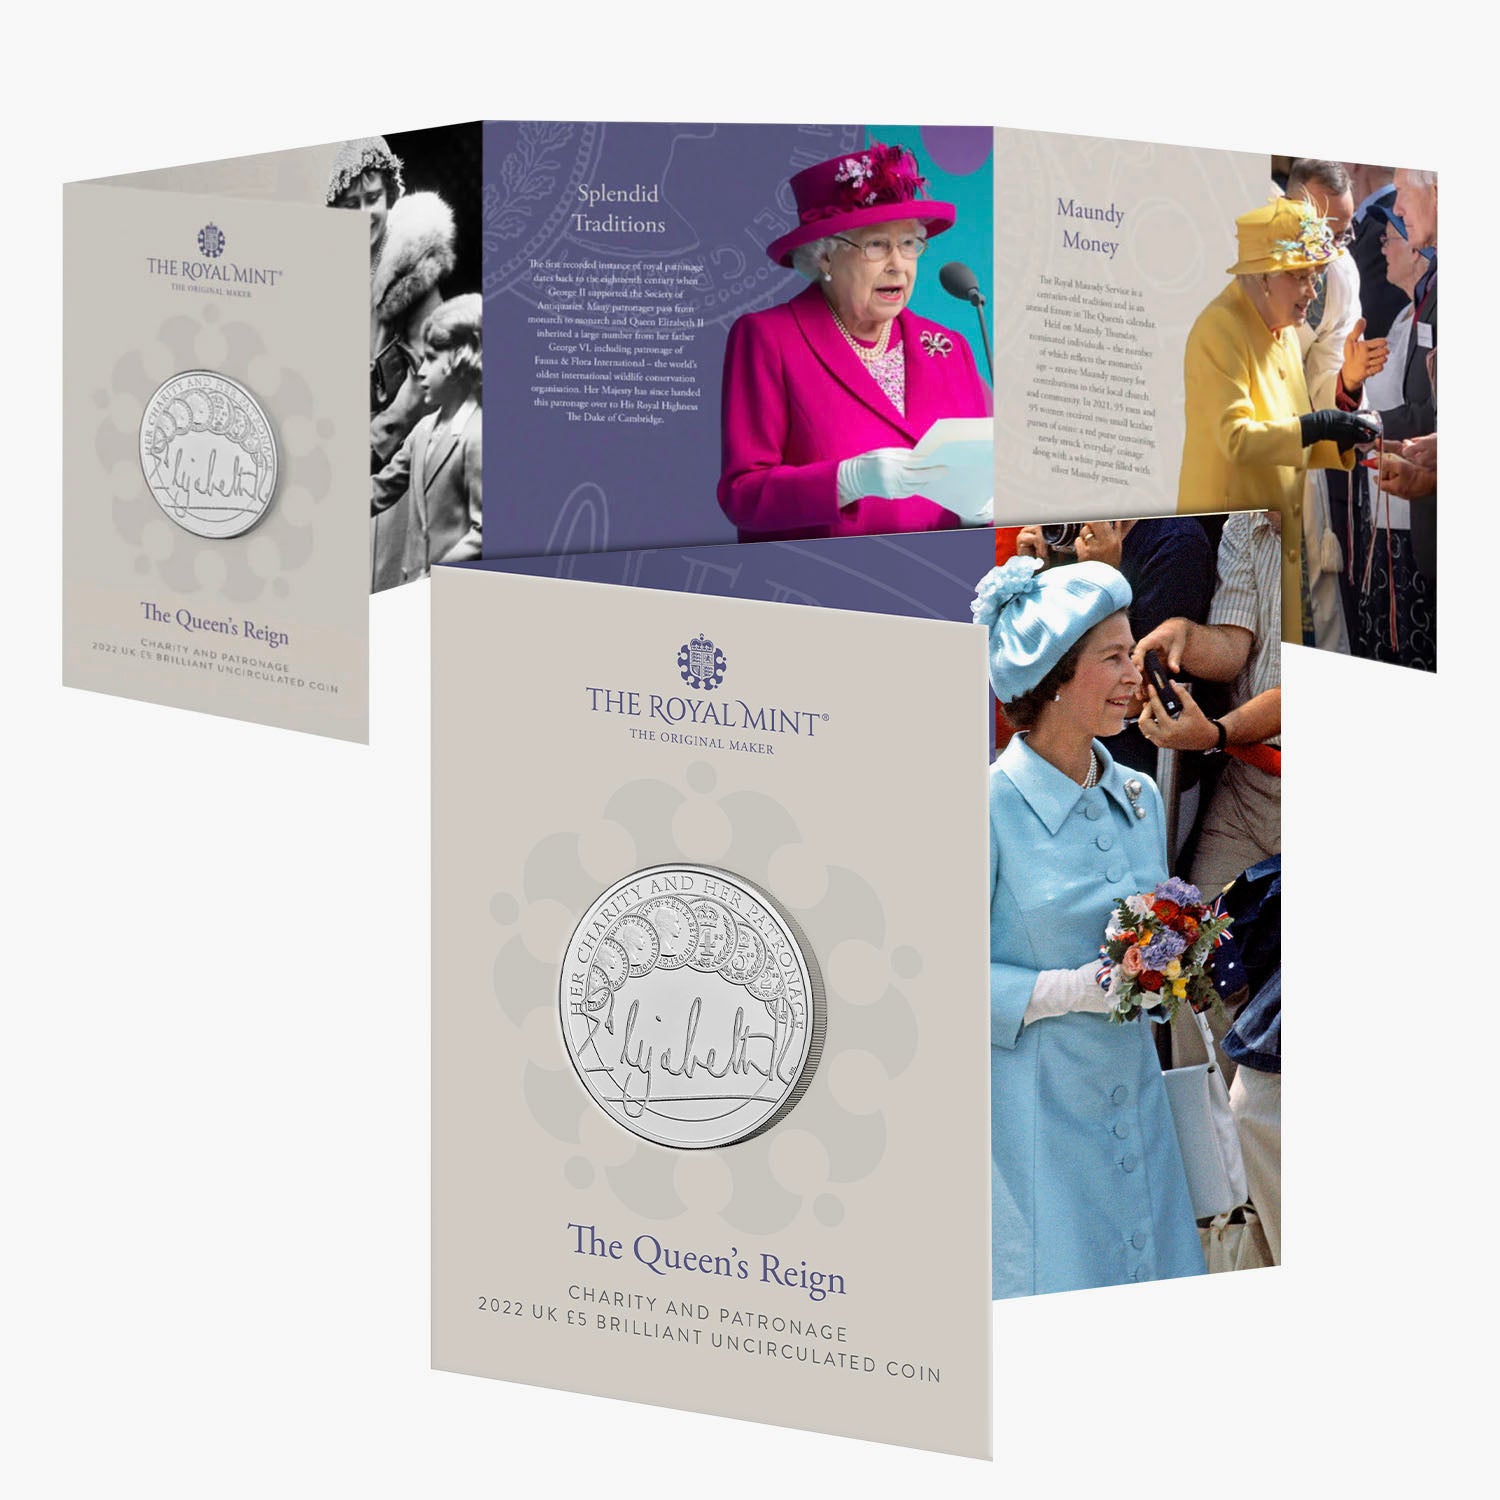 The Queen's Reign Charity &amp; Patronage 2022 UK £5 BU コイン